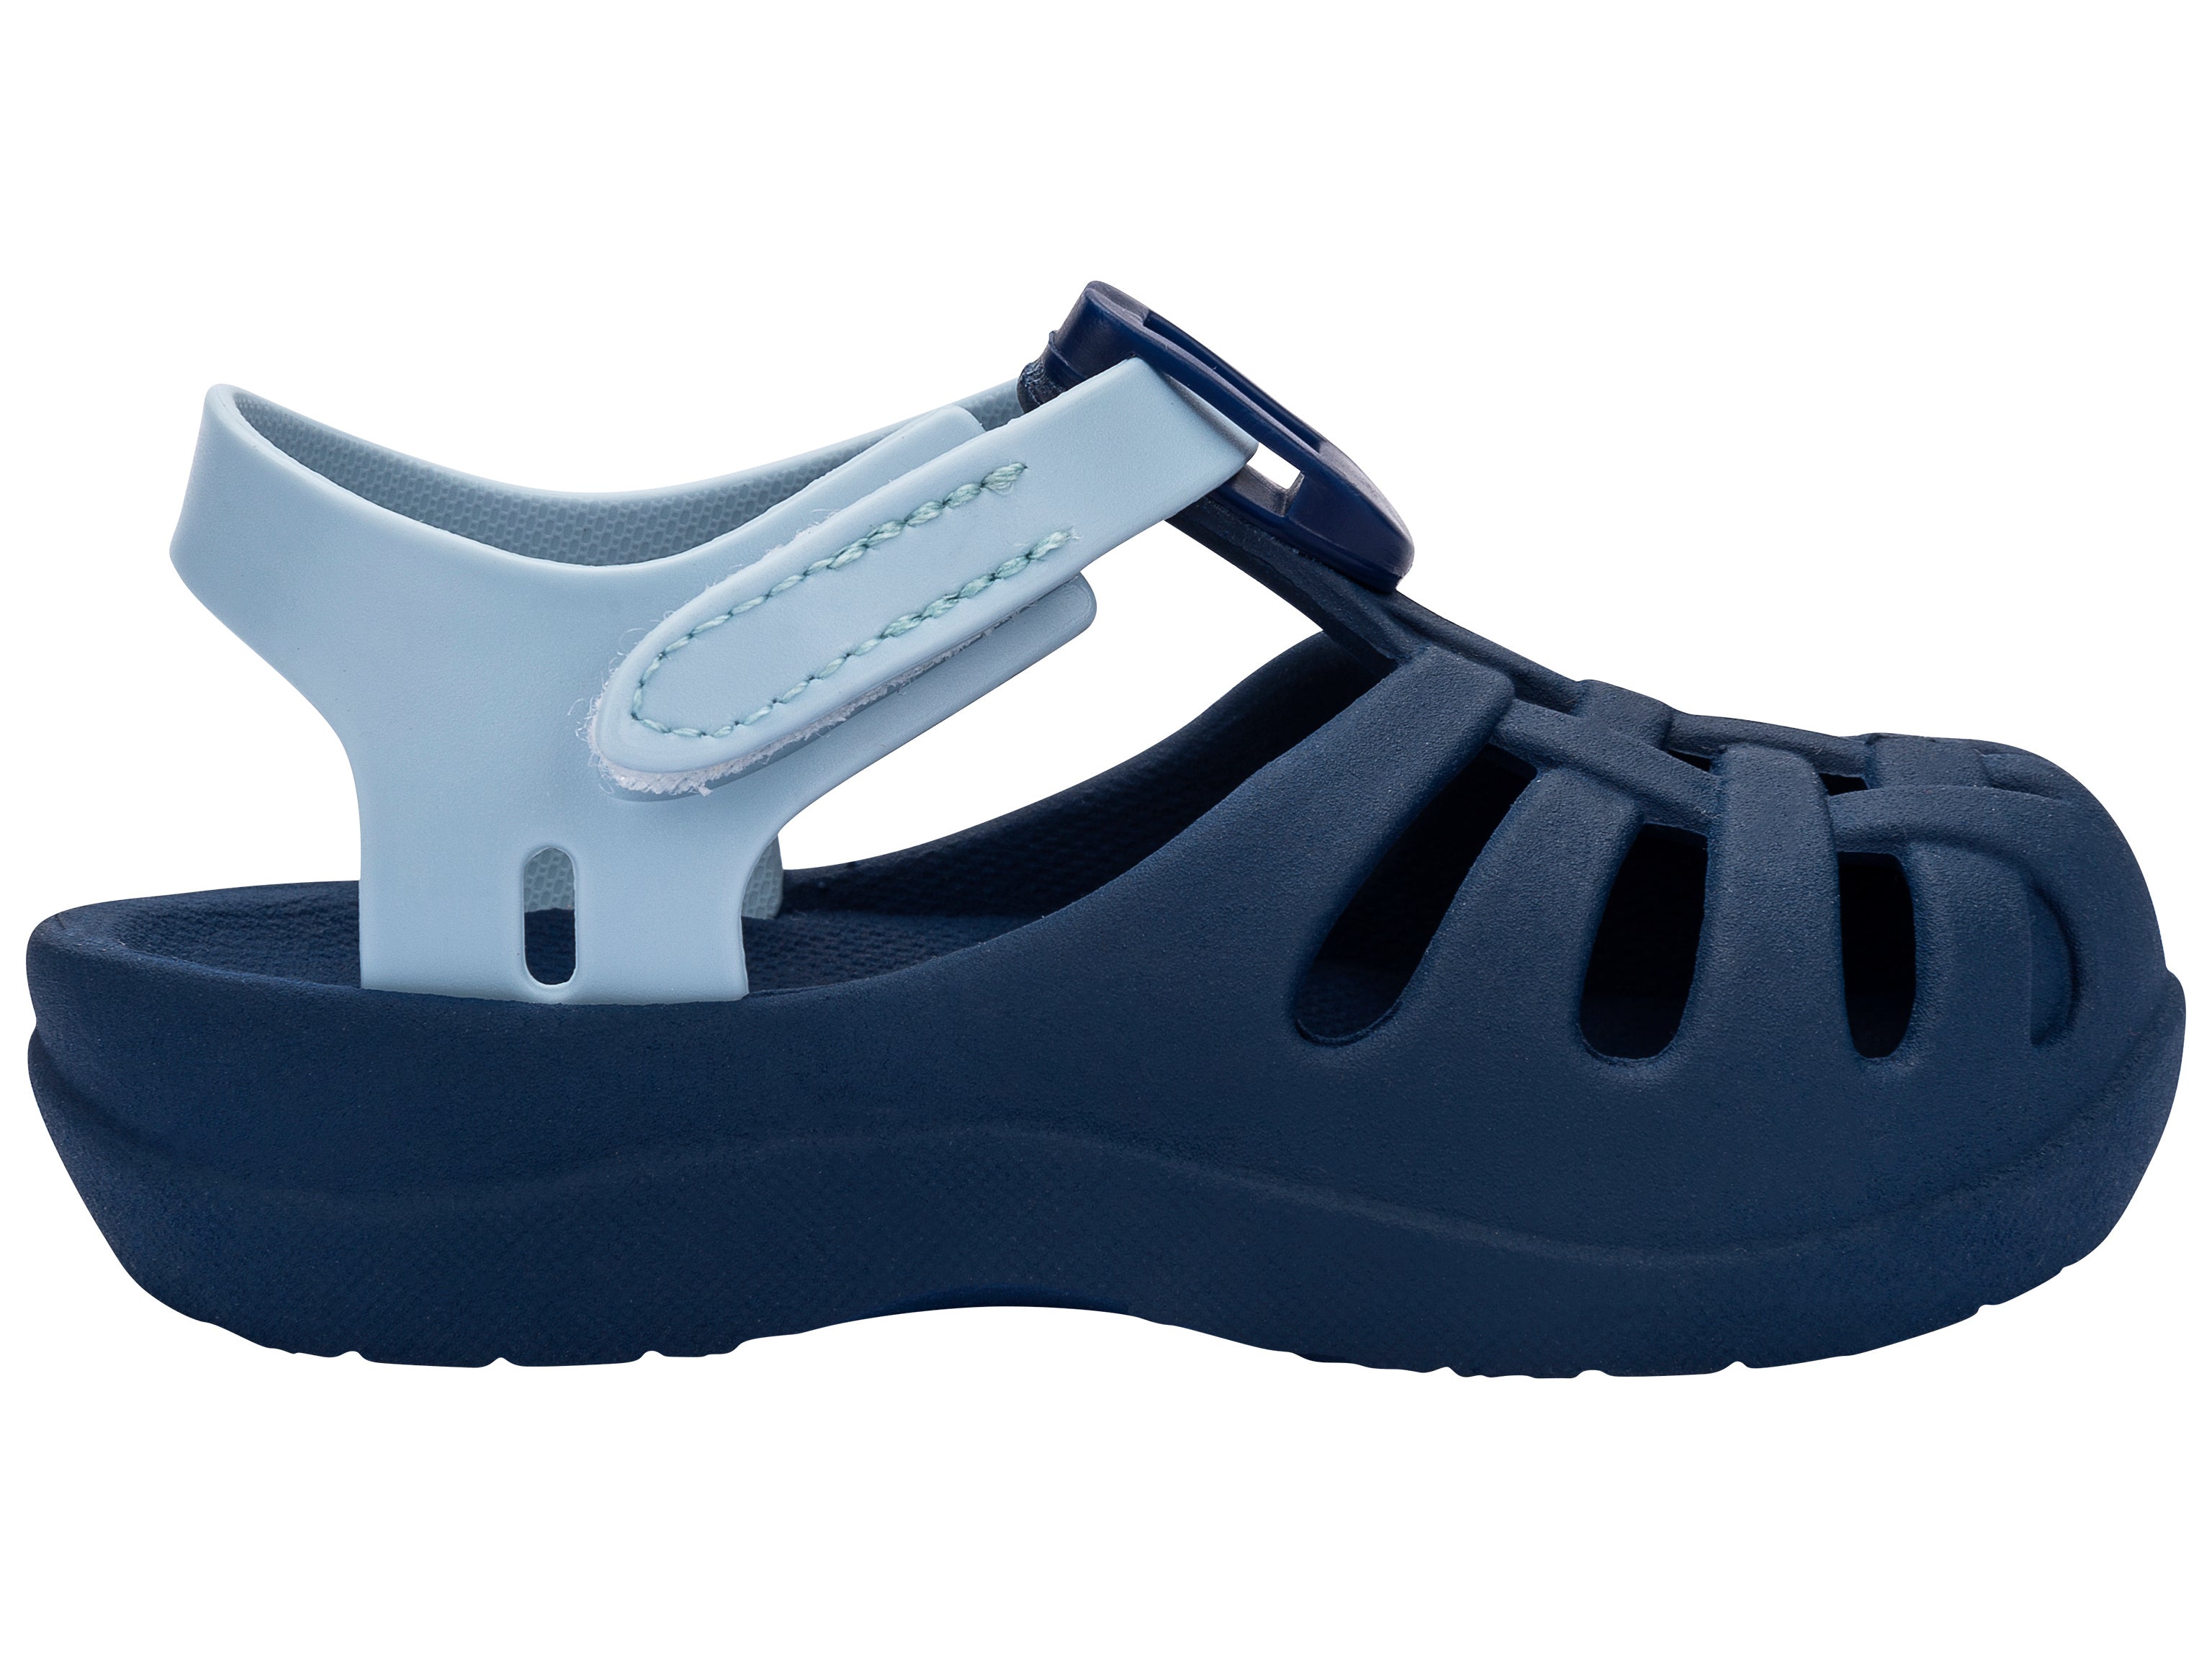 Outer side view of a blue Ipanema Summer Basic baby sandal.